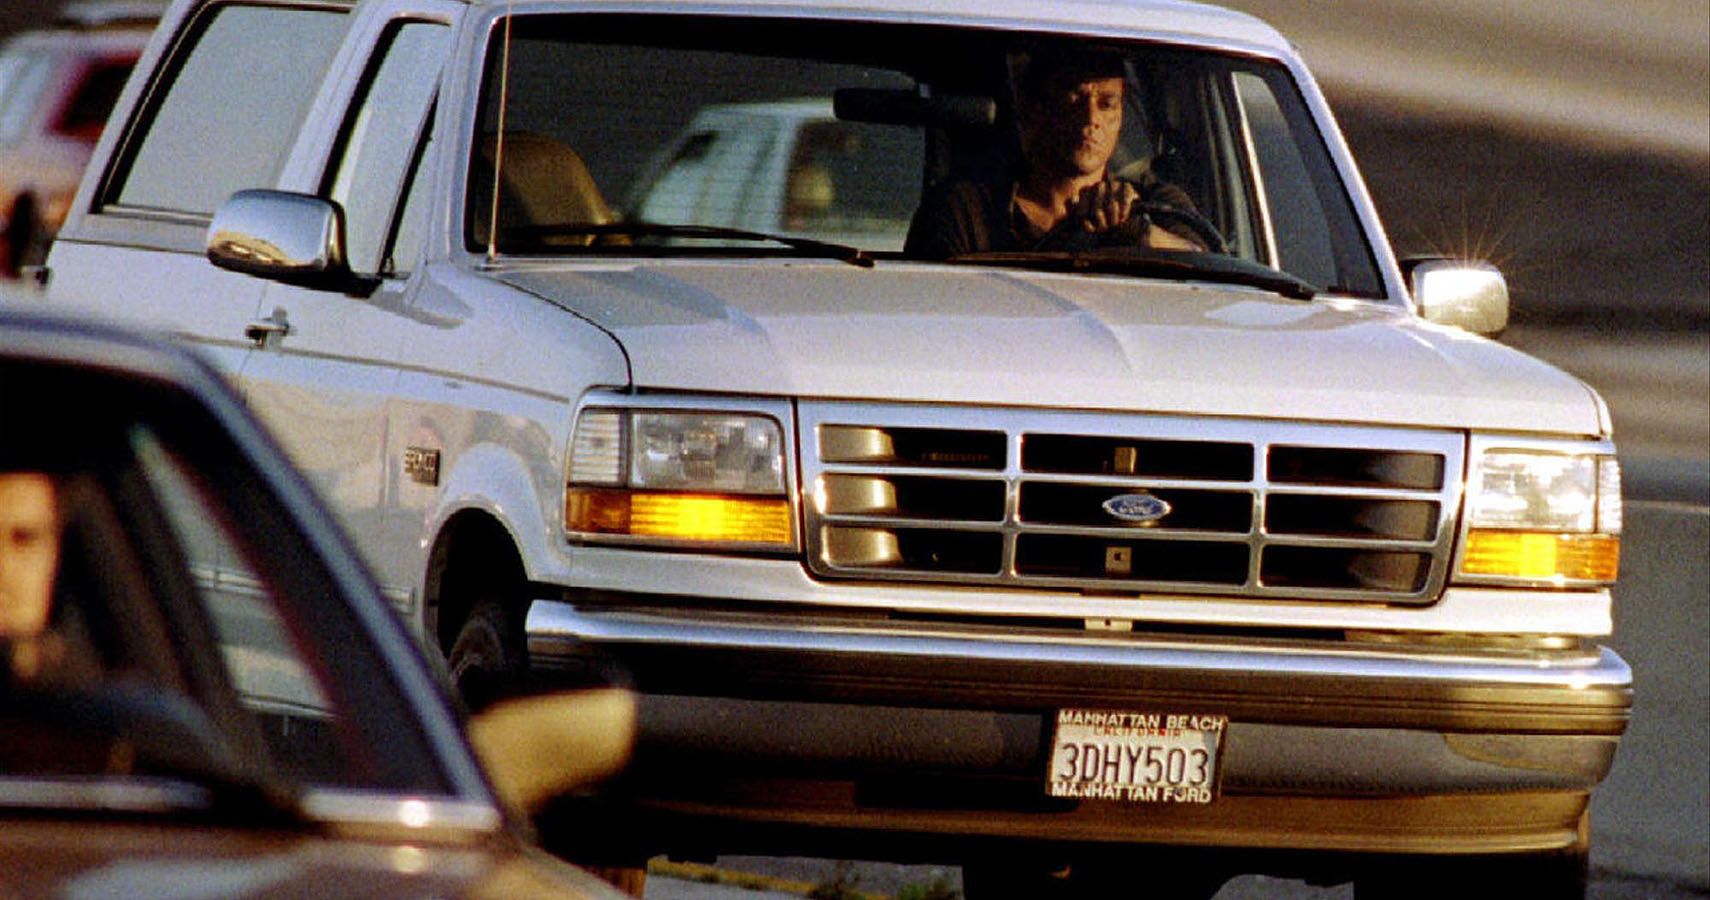 10 Things You Didn't Know About OJ's White Ford Bronco